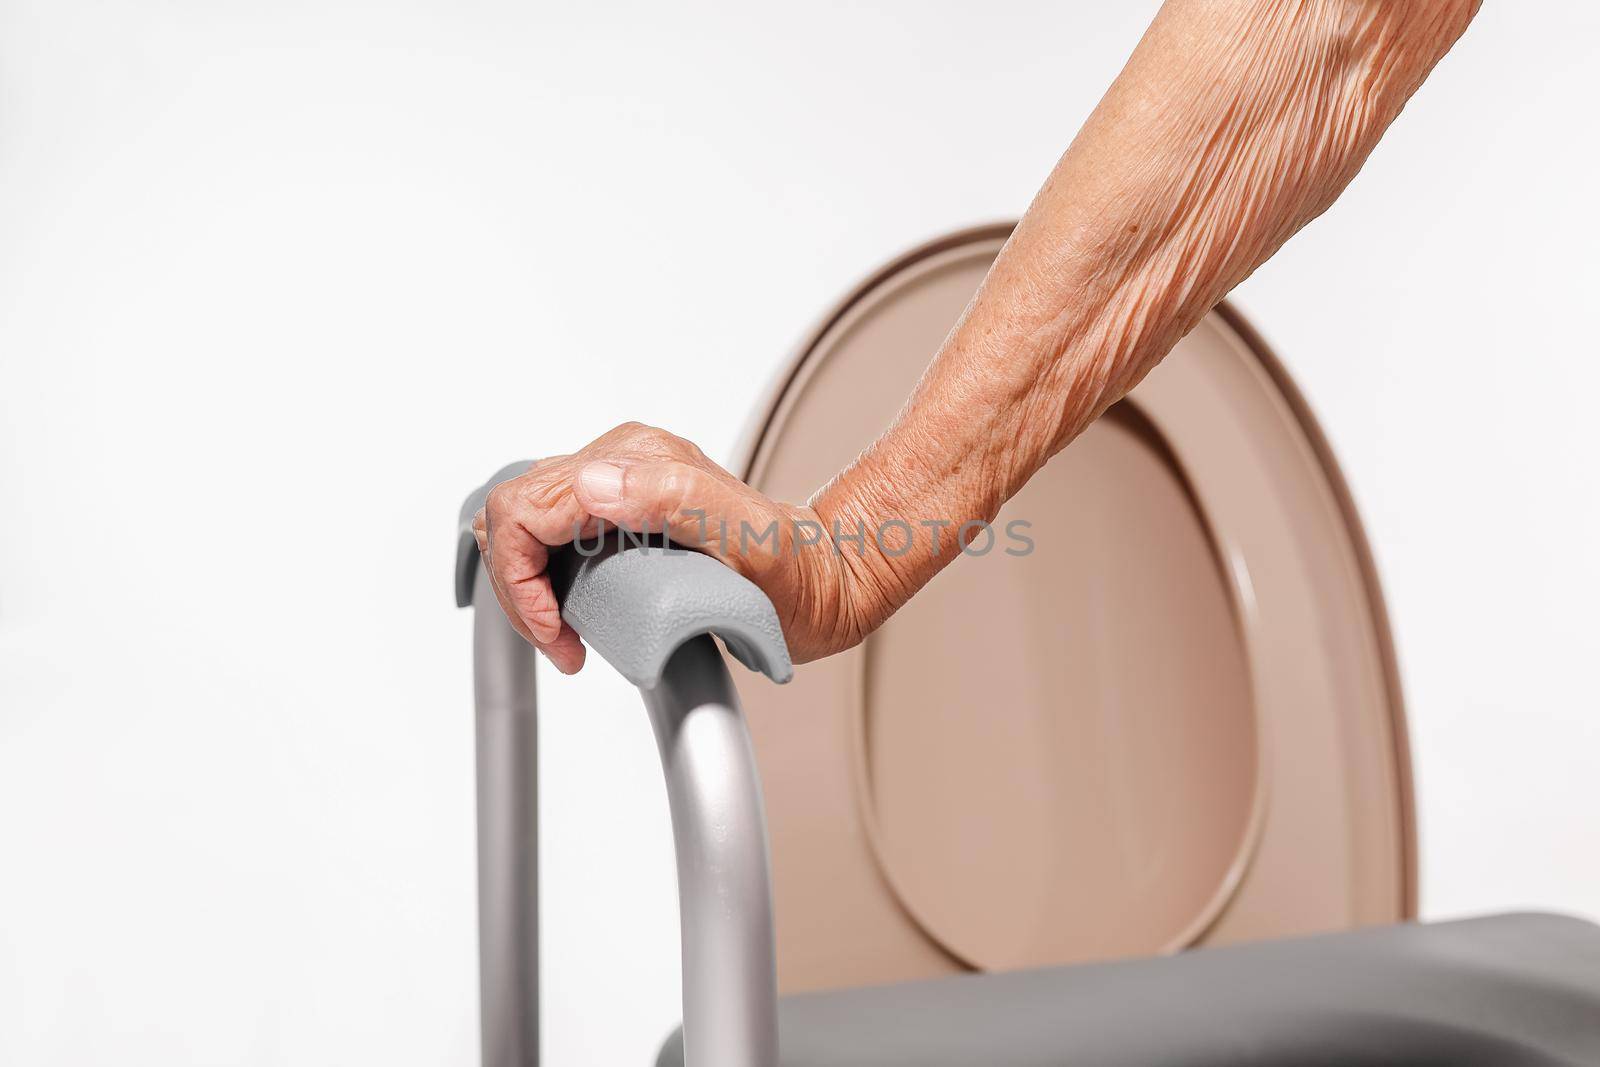 Elderly woman using mobile toilet seat chair by toa55